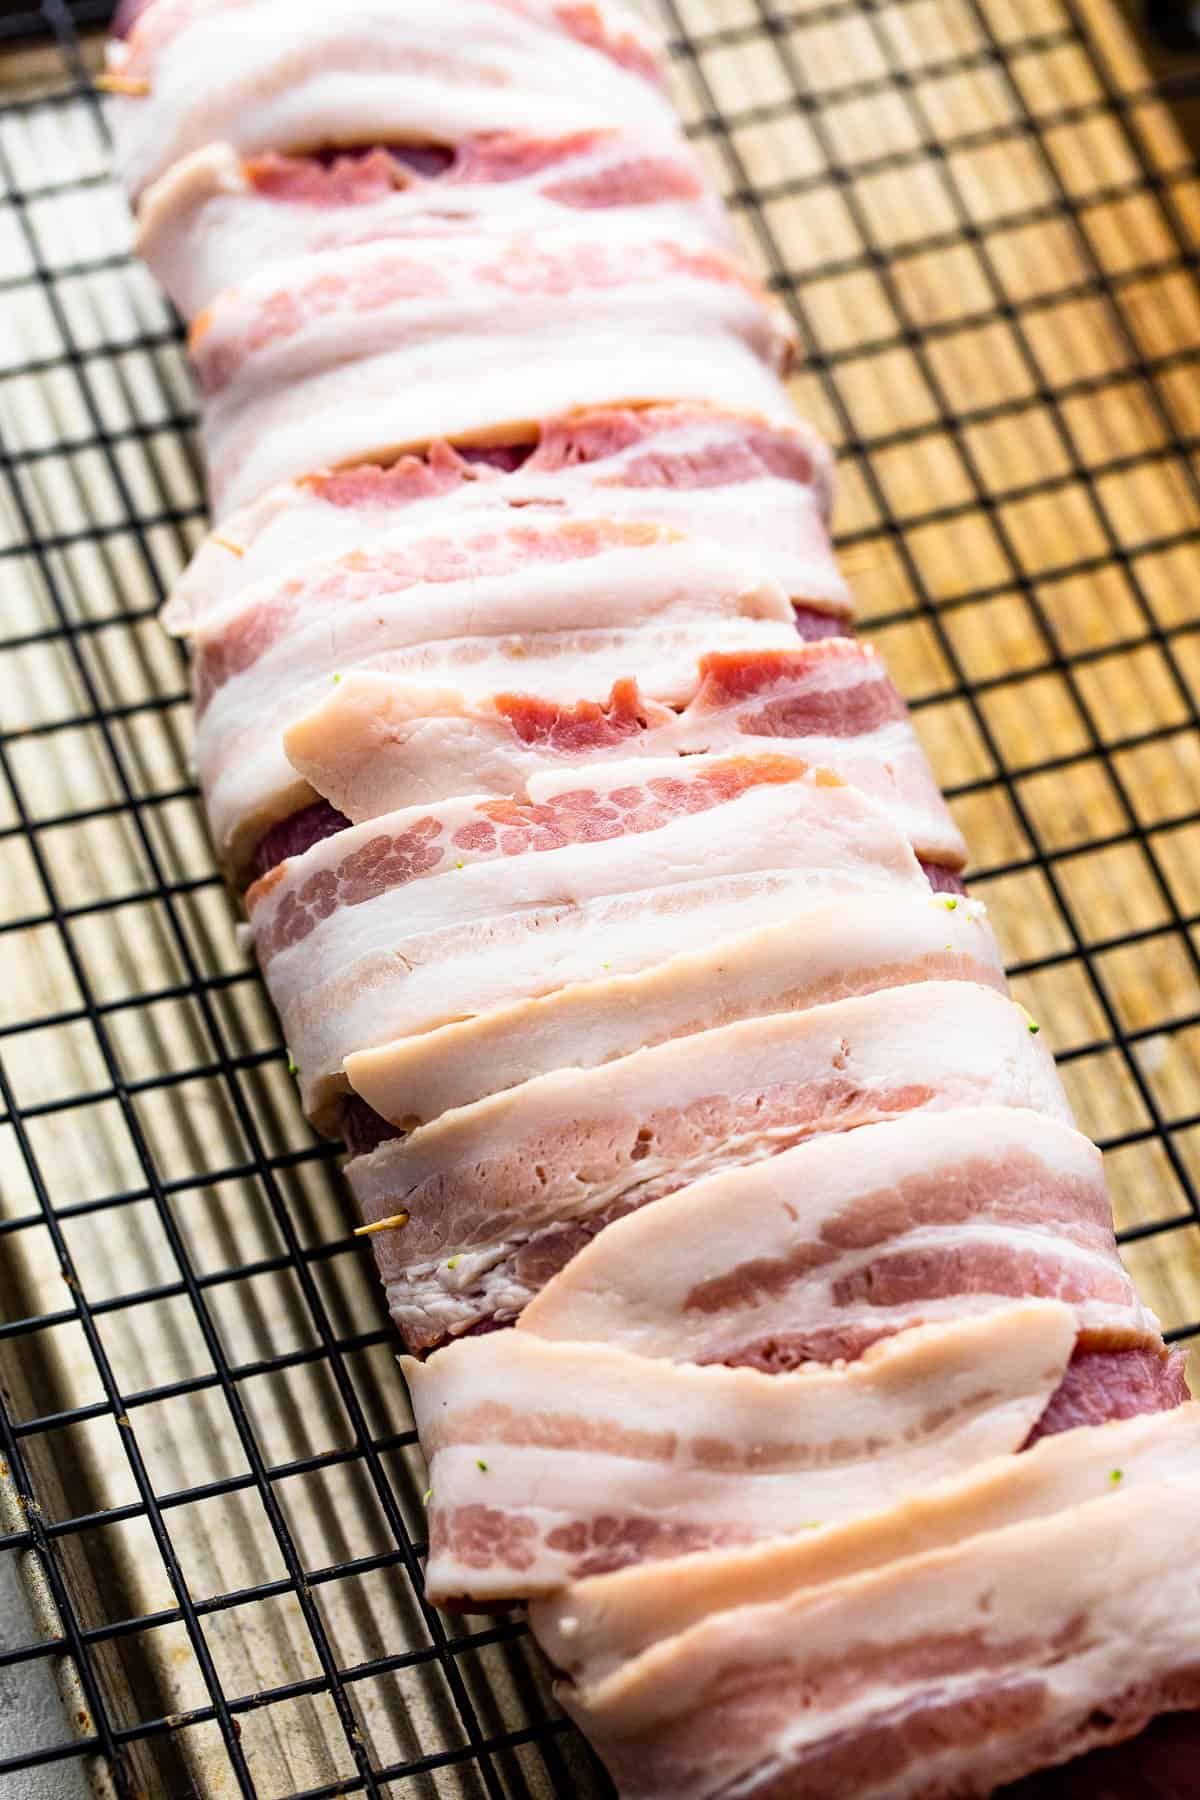 raw pork tenderloin wrapped in pork and set on a wire rack